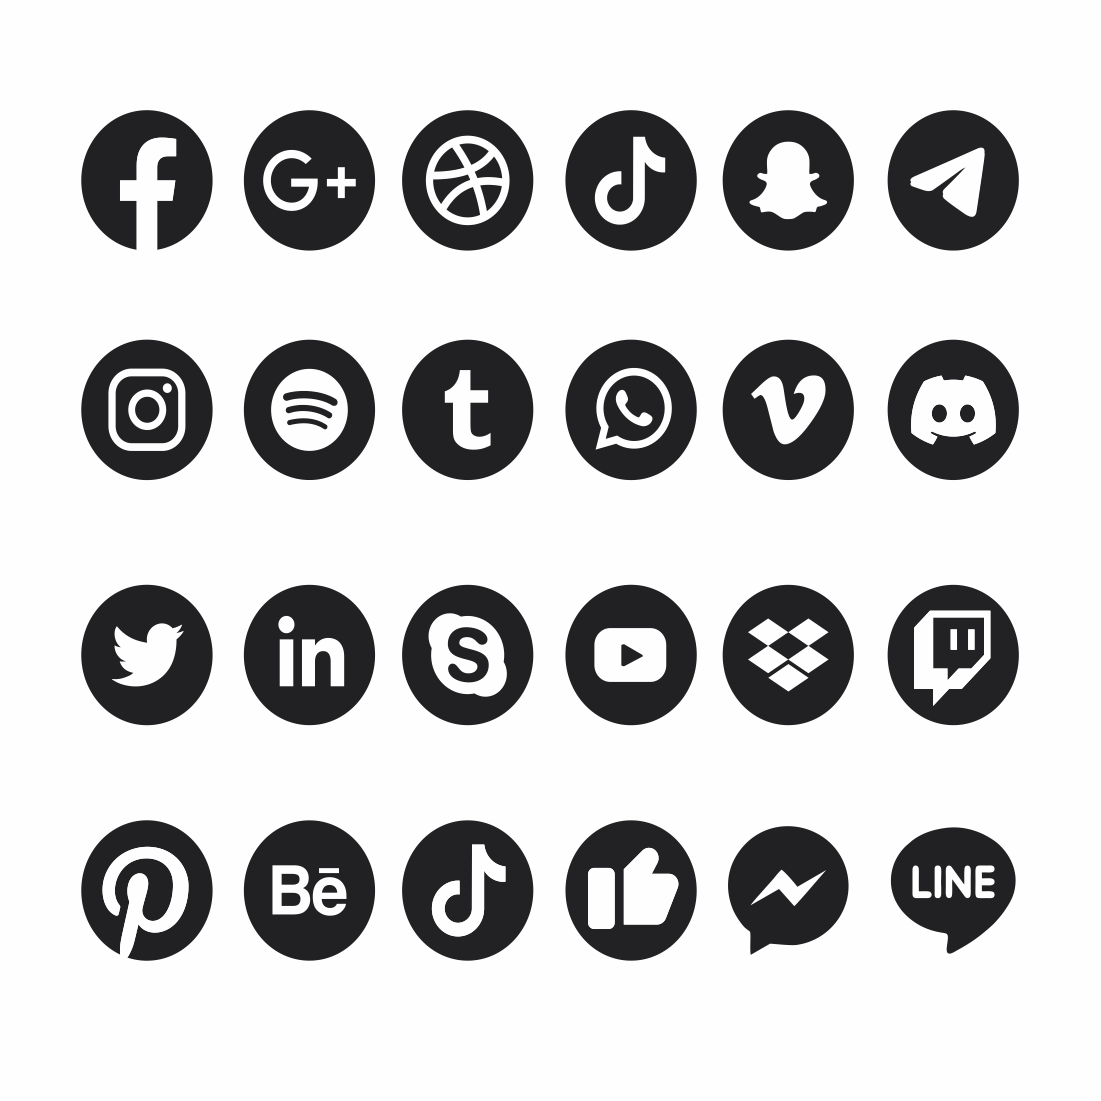 Set Of Social Media Icons cover image.